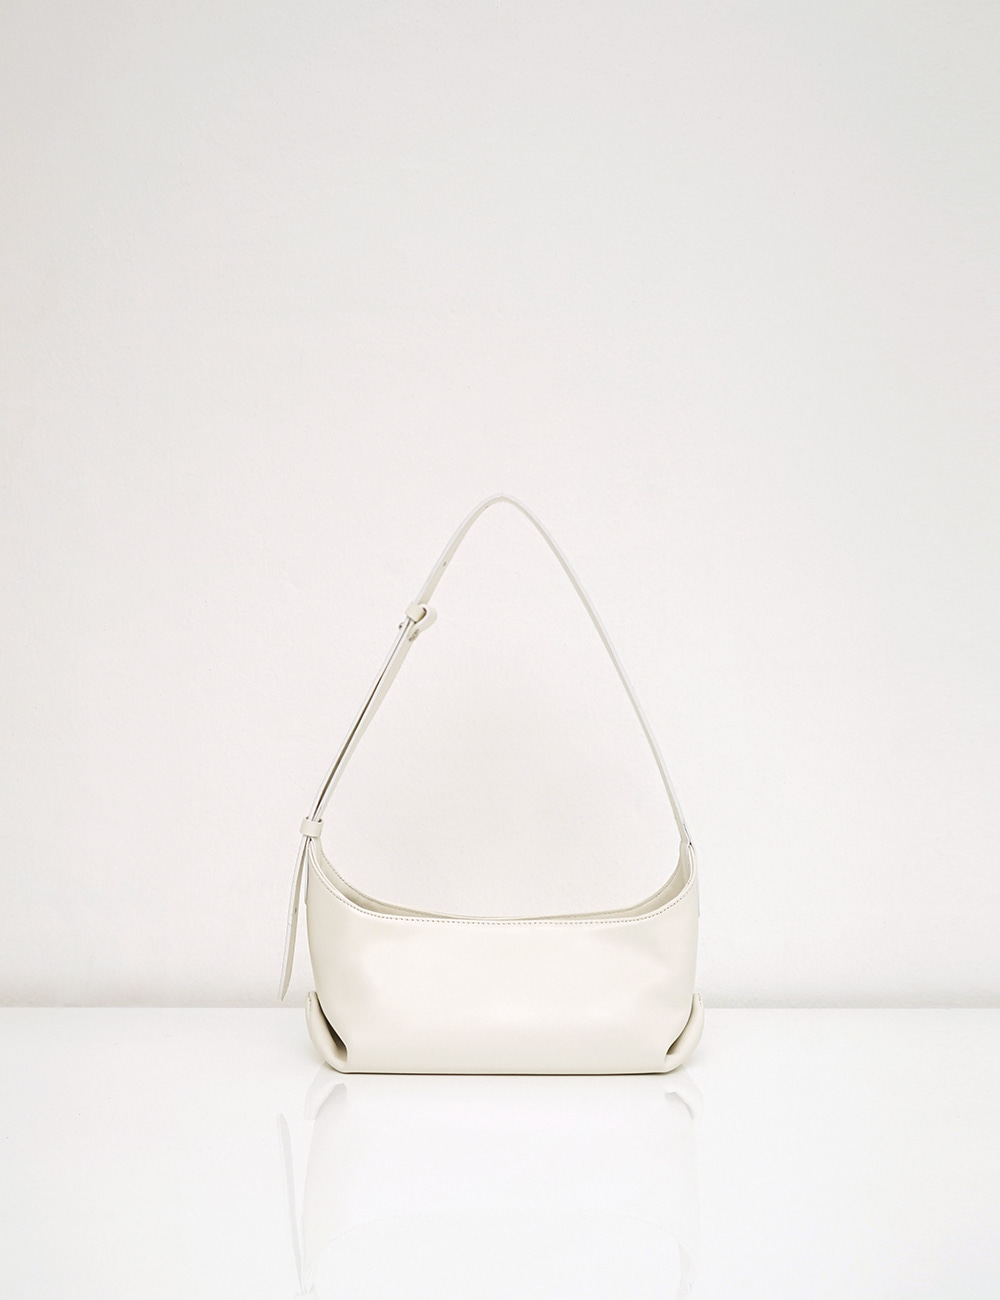 Bote bag / white (sold out)